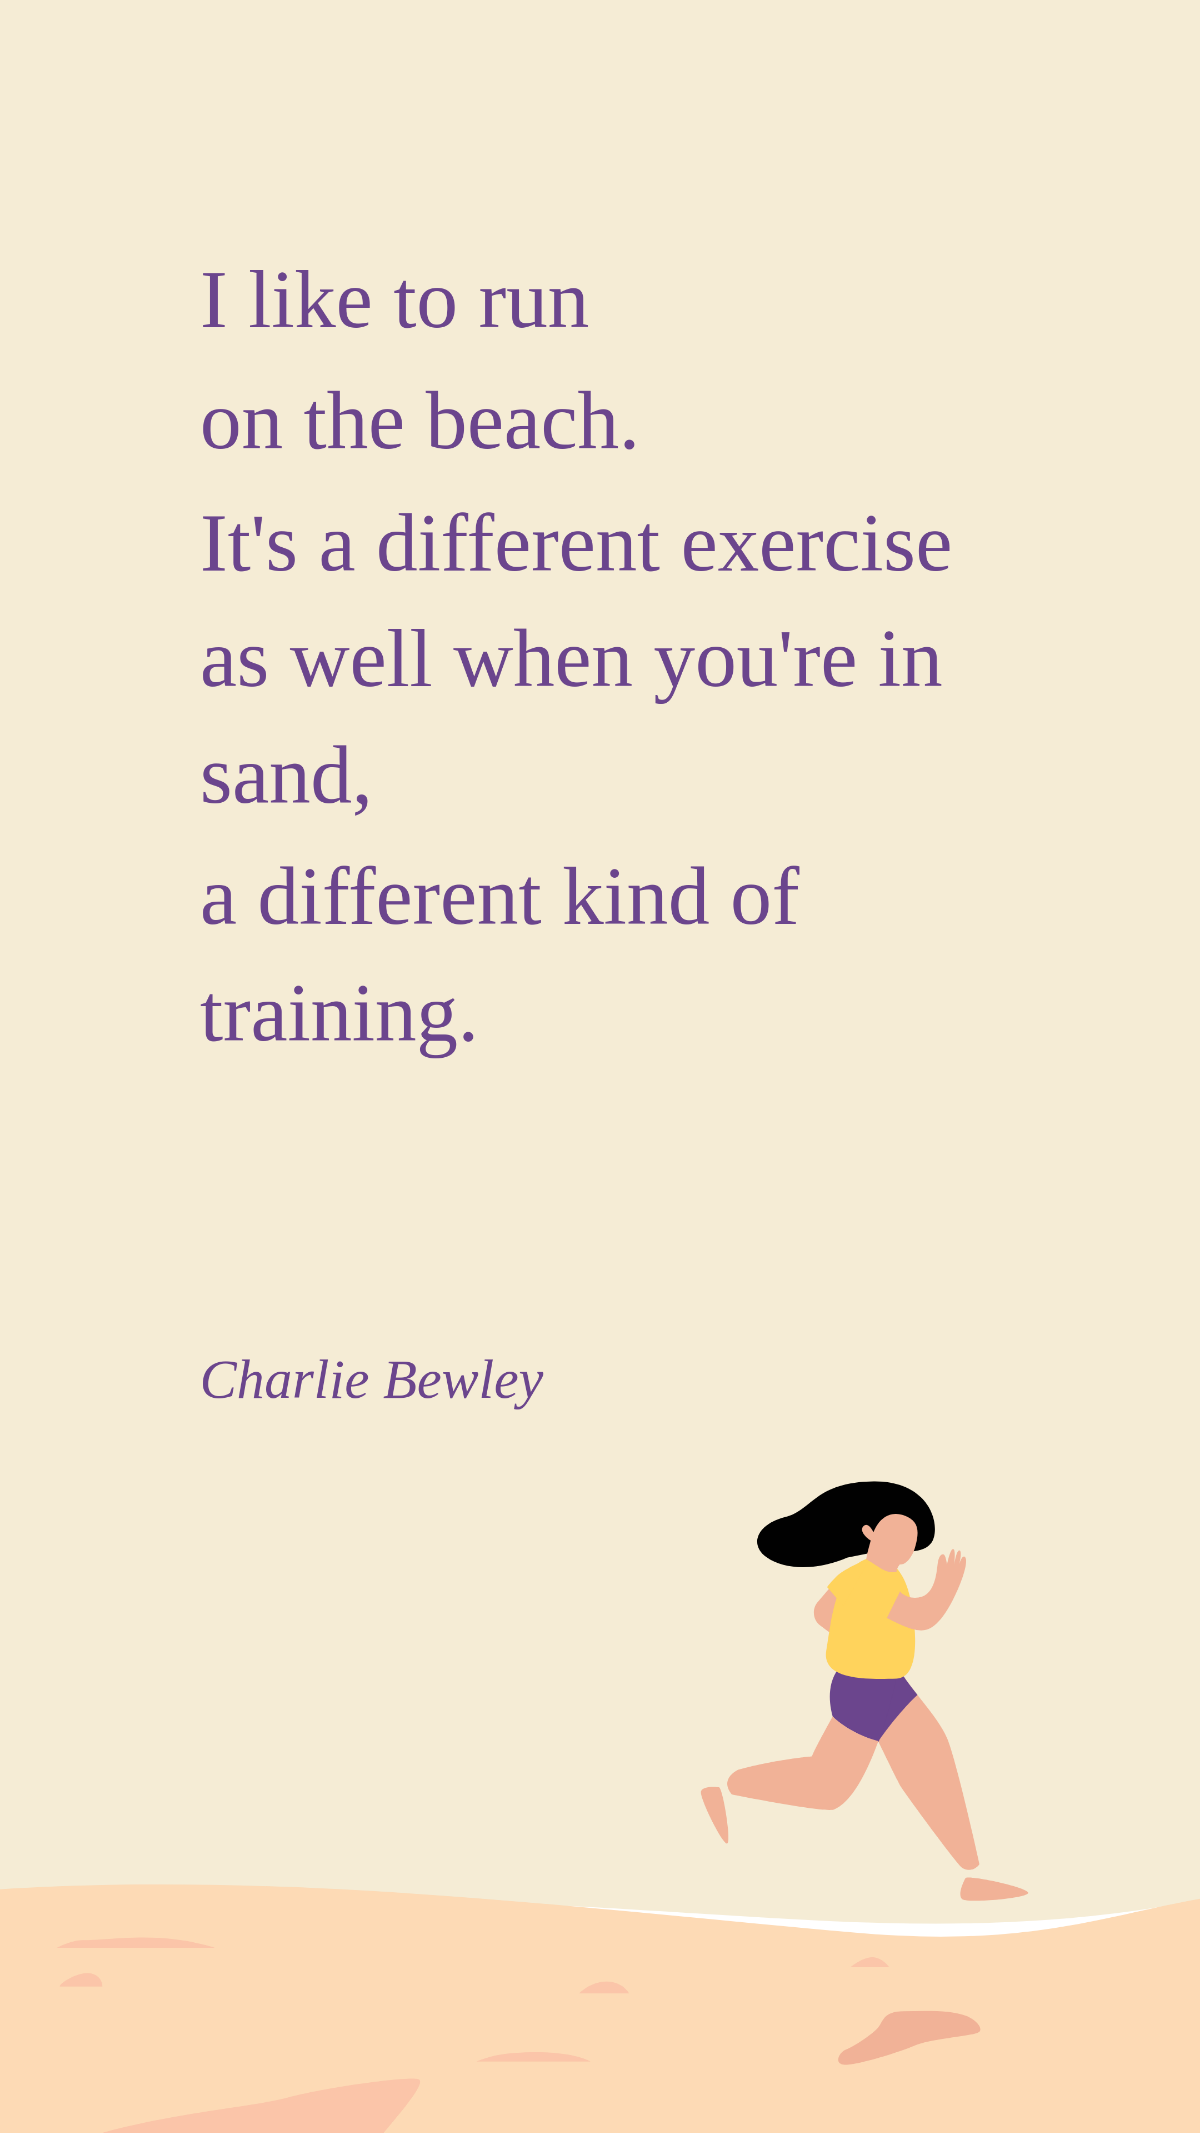 Charlie Bewley - I like to run on the beach. It's a different exercise as well when you're in sand, a different kind of training.